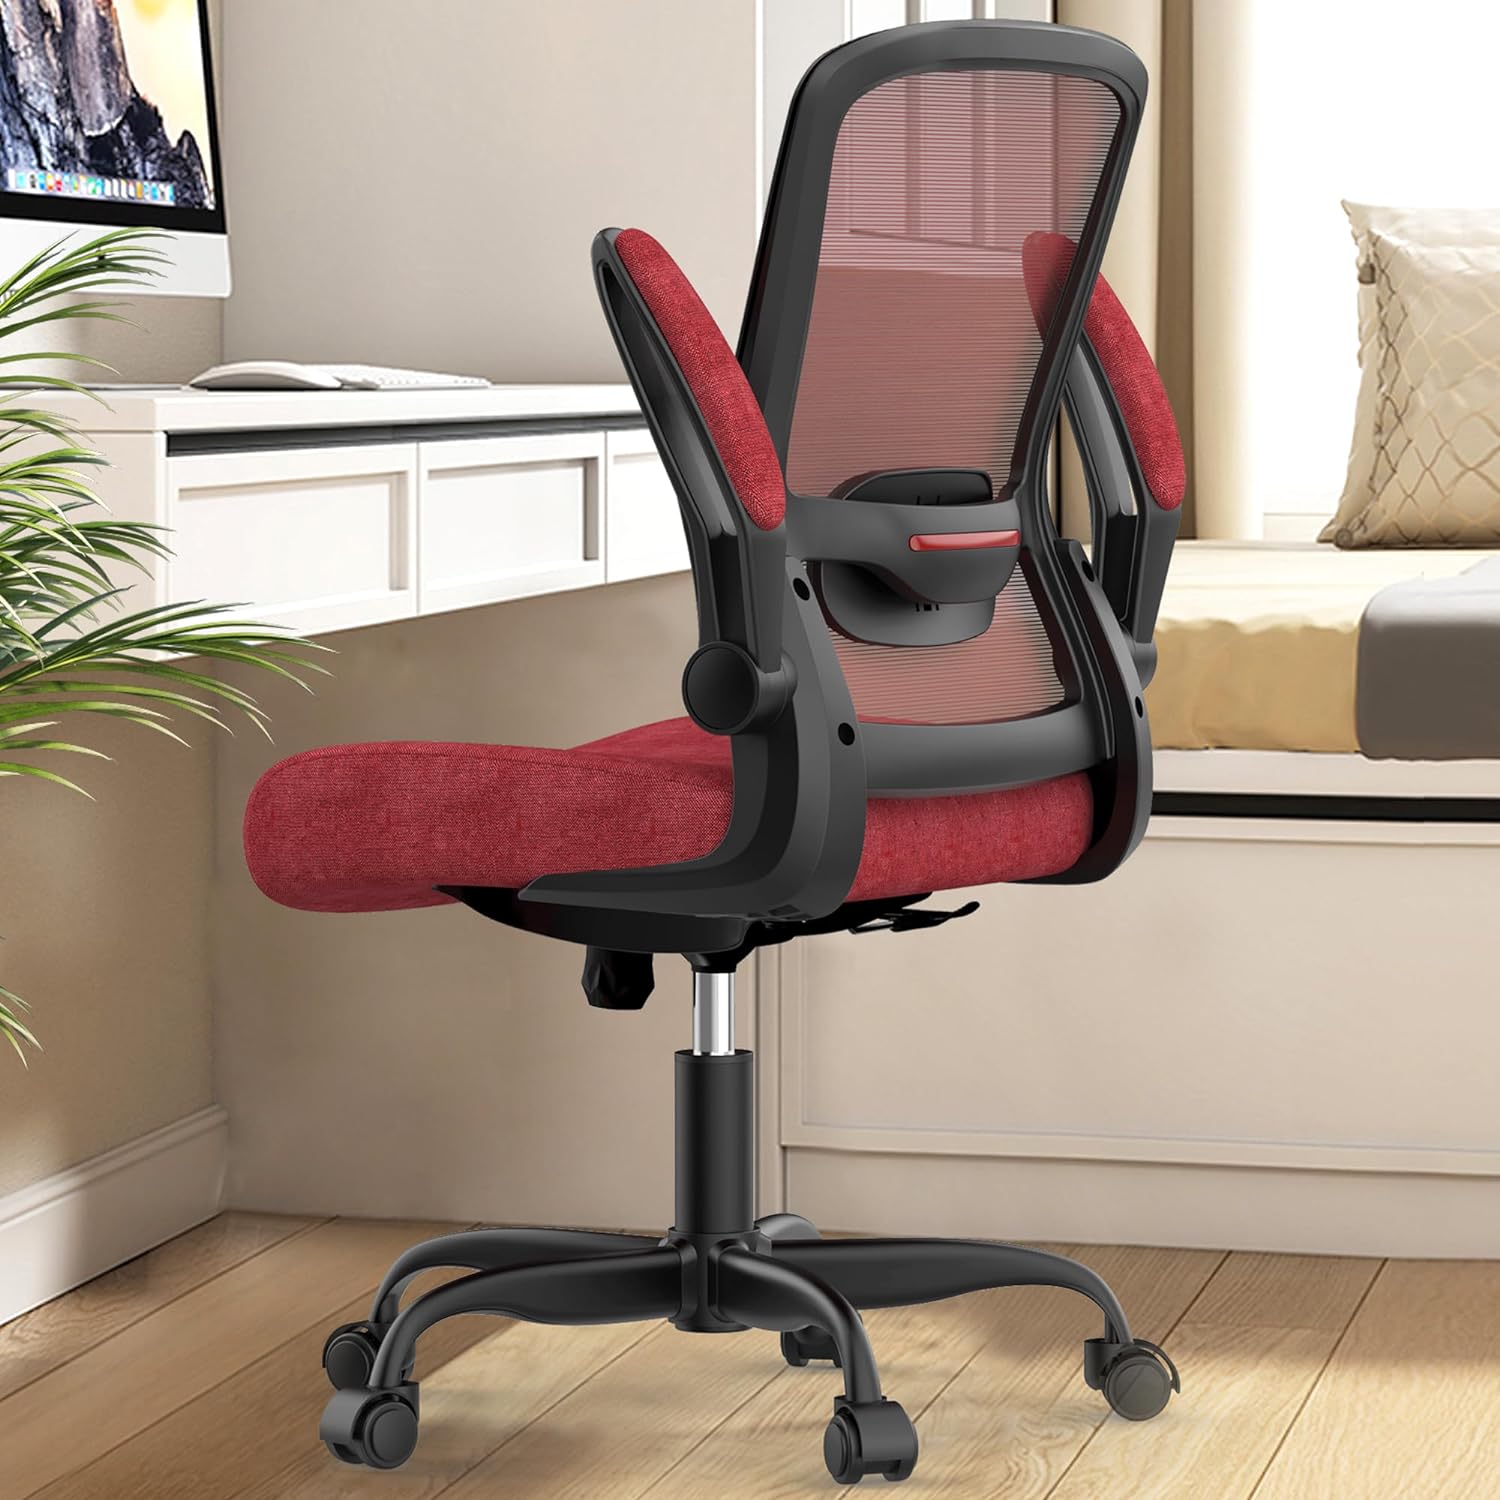 https://bigbigmart.com/wp-content/uploads/2023/12/Mimoglad-Office-Chair-Ergonomic-Desk-Chair-with-Adjustable-Lumbar-Support-High-Back-Mesh-Computer-Chair-with-Flip-up-Armrests-BIFMA-Passed-Task-Chairs-Executive-Chair-for-Home-Office-Carmine-Roses.jpg